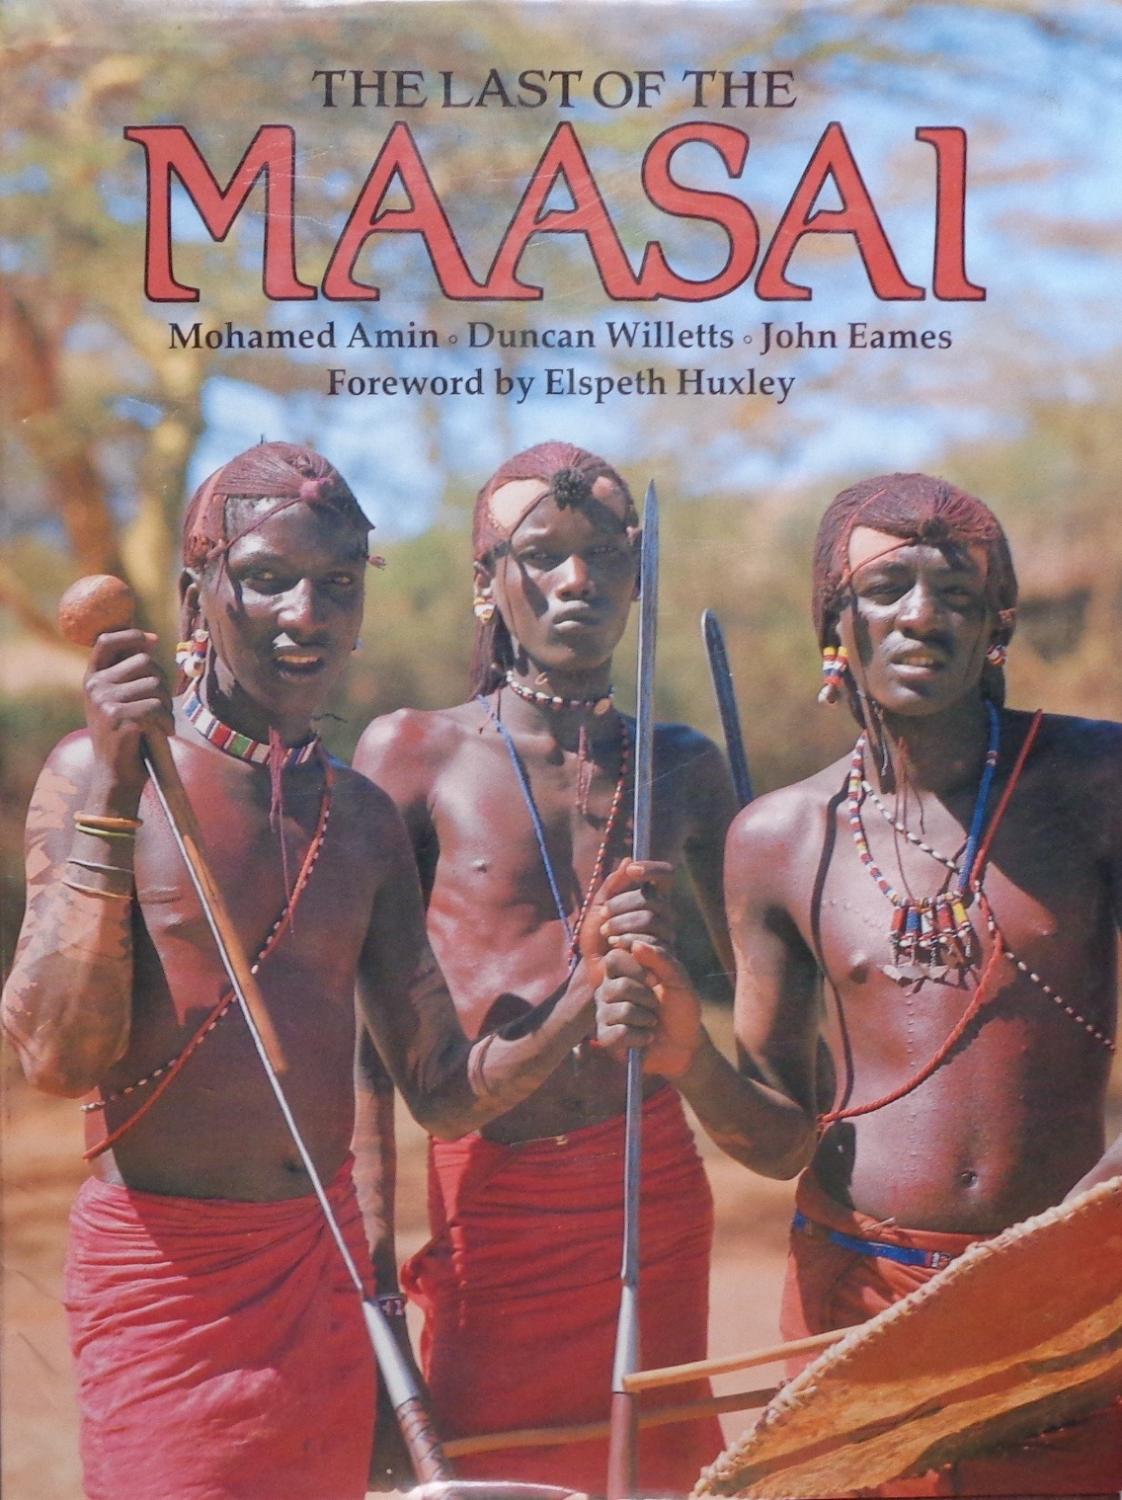 The Last of the Maasai book by Mohamed Amin